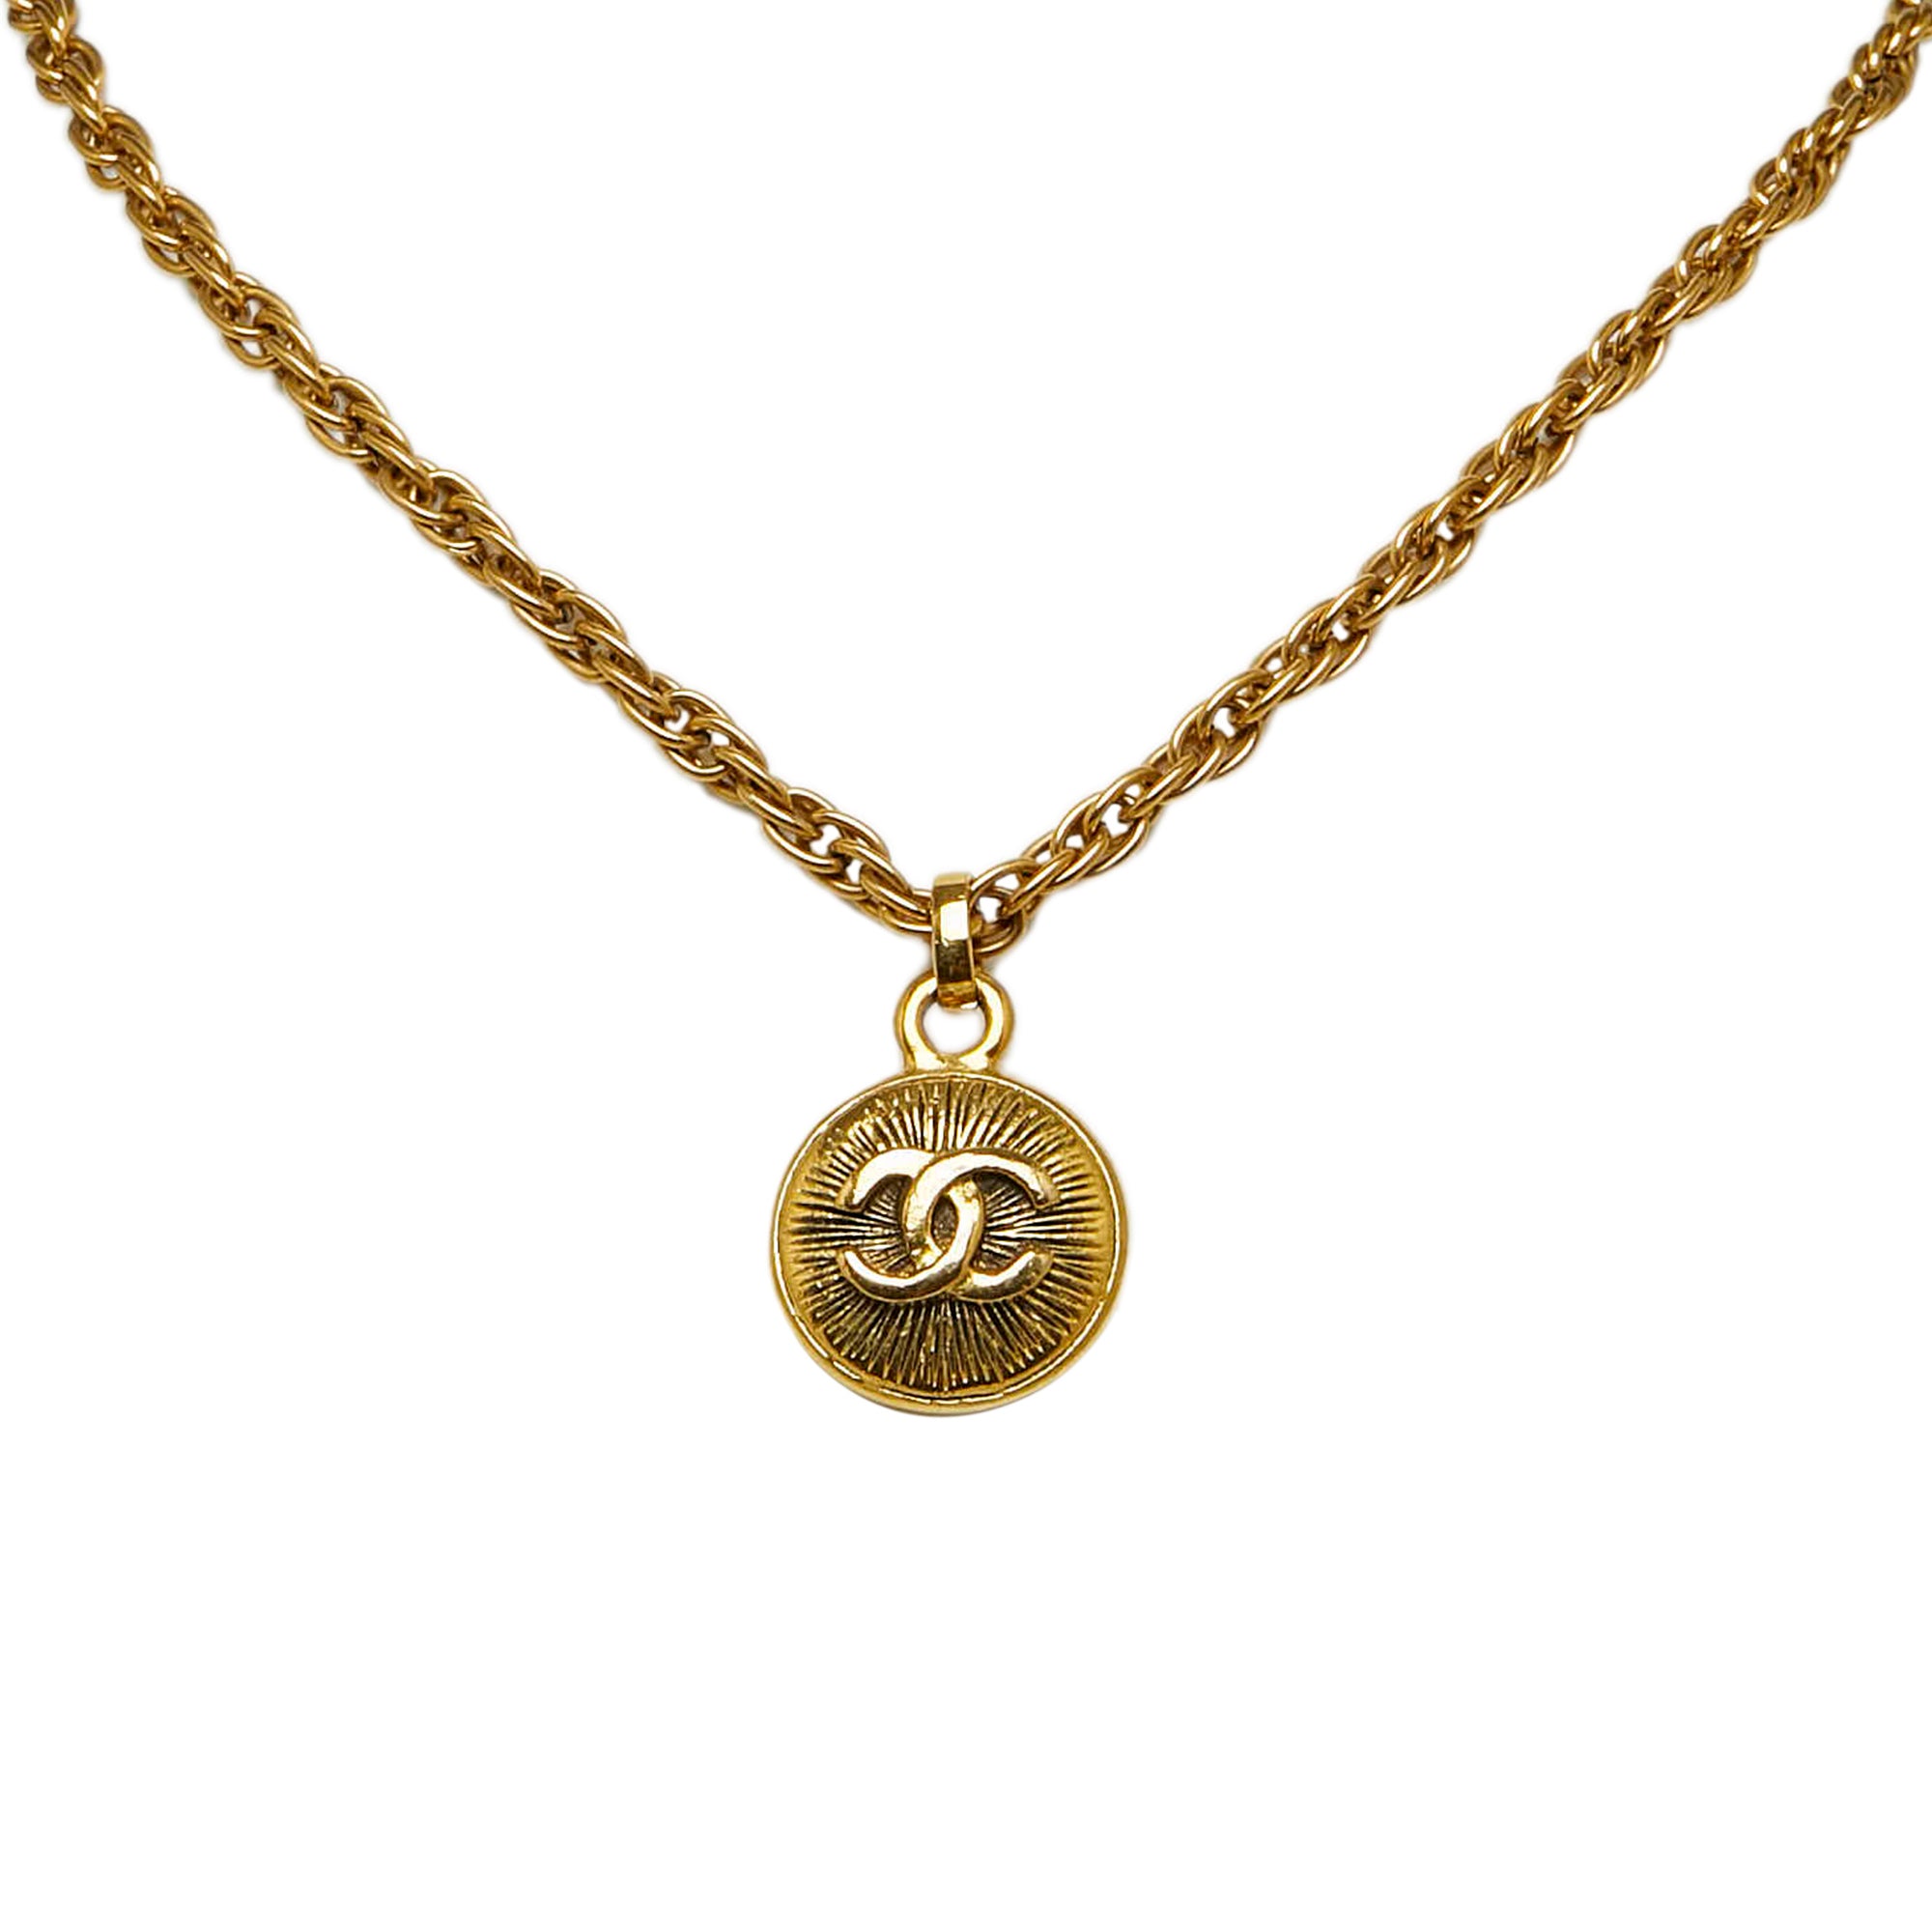 Chanel - Vintage Simple Small CC Logo Pendant Necklace  Vintage chanel  jewelry, Chanel jewelry, Chanel jewelry necklace